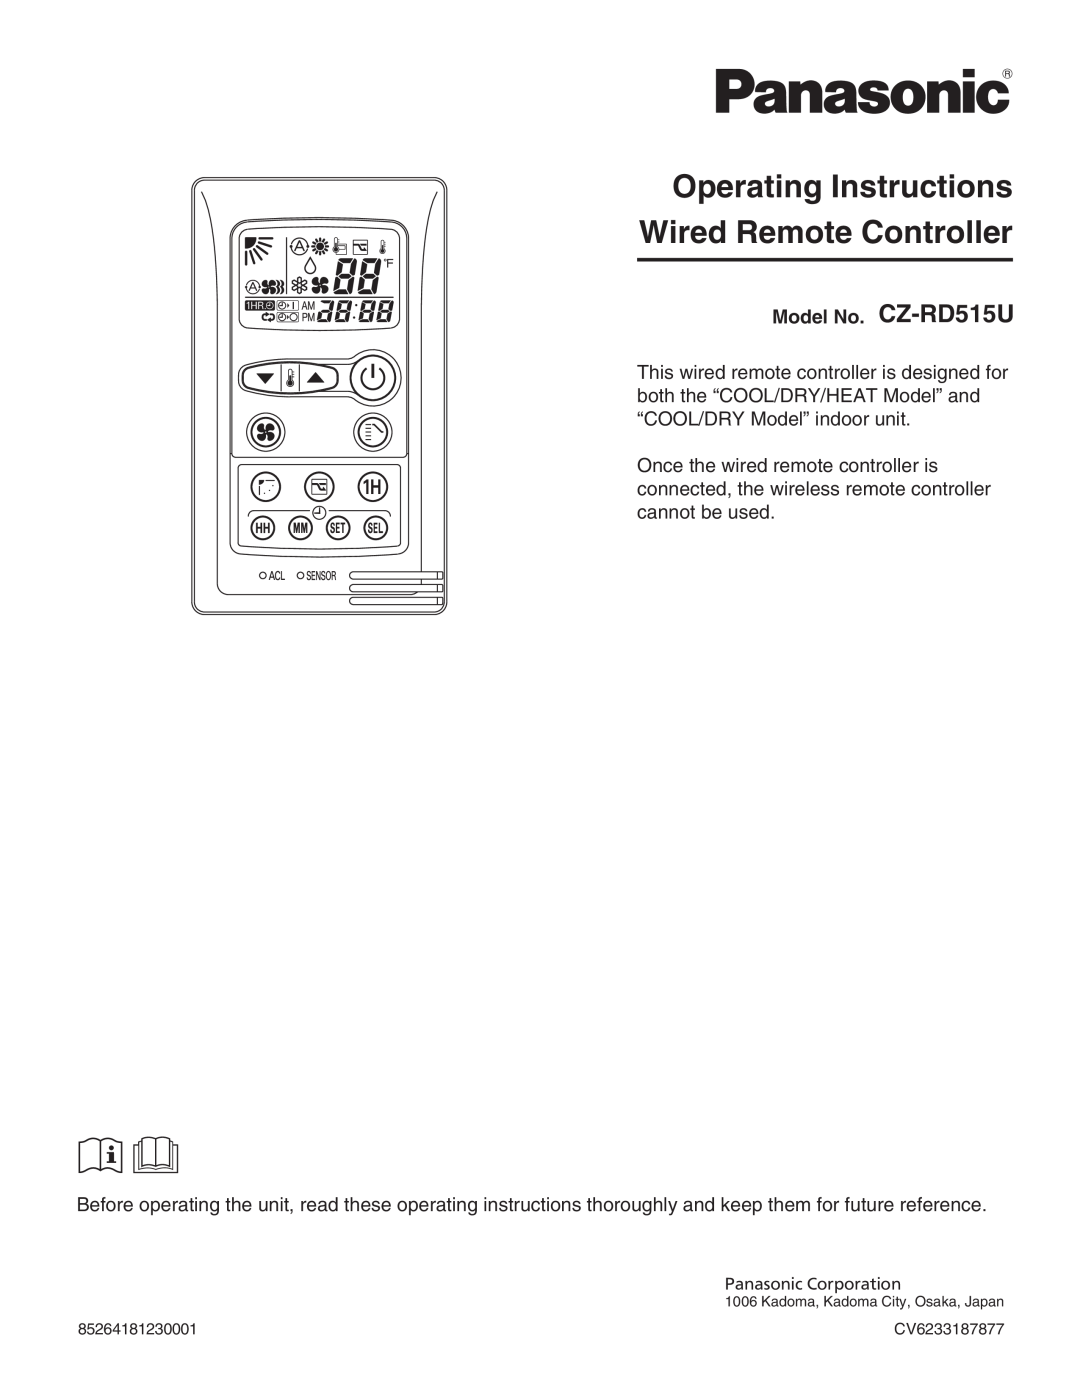 Panasonic service manual Operating Instructions Wired Remote Controller, Model No. CZ-RD515U 